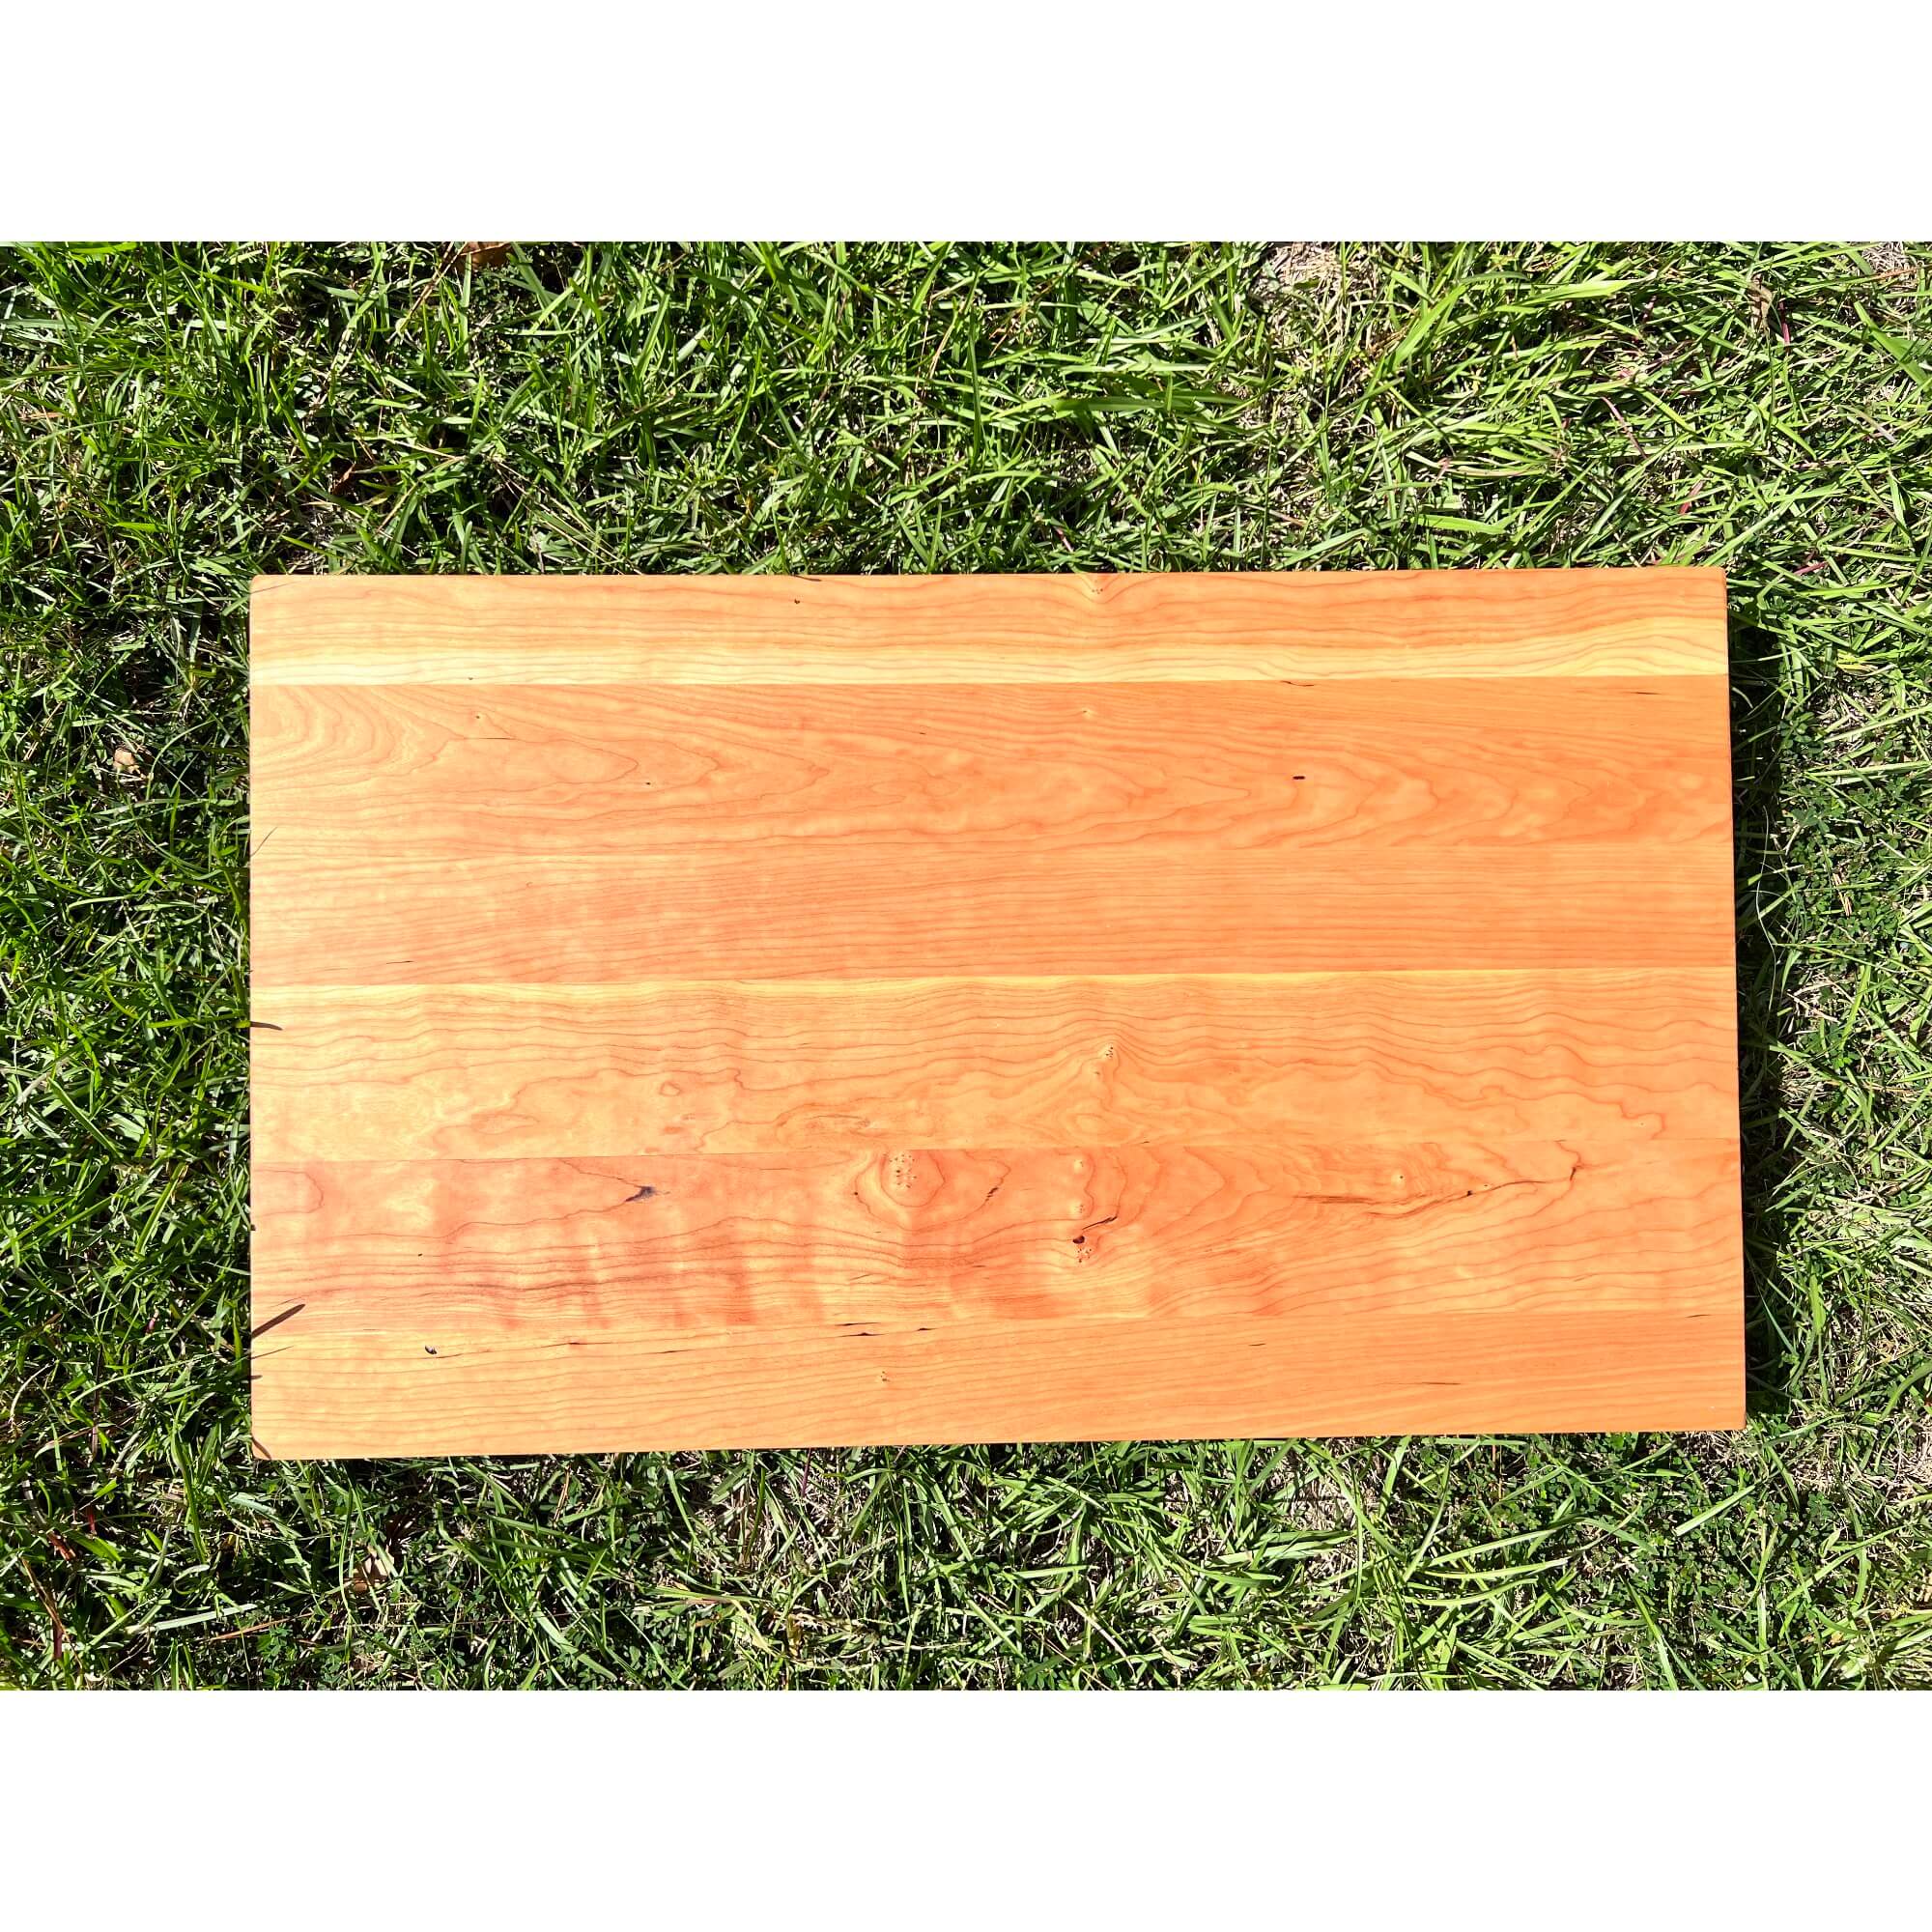 Christmas Gift ideas for Parents, Solid Cherry Stove top cover Cutting  Board Combo – Sawyer Custom Crafts